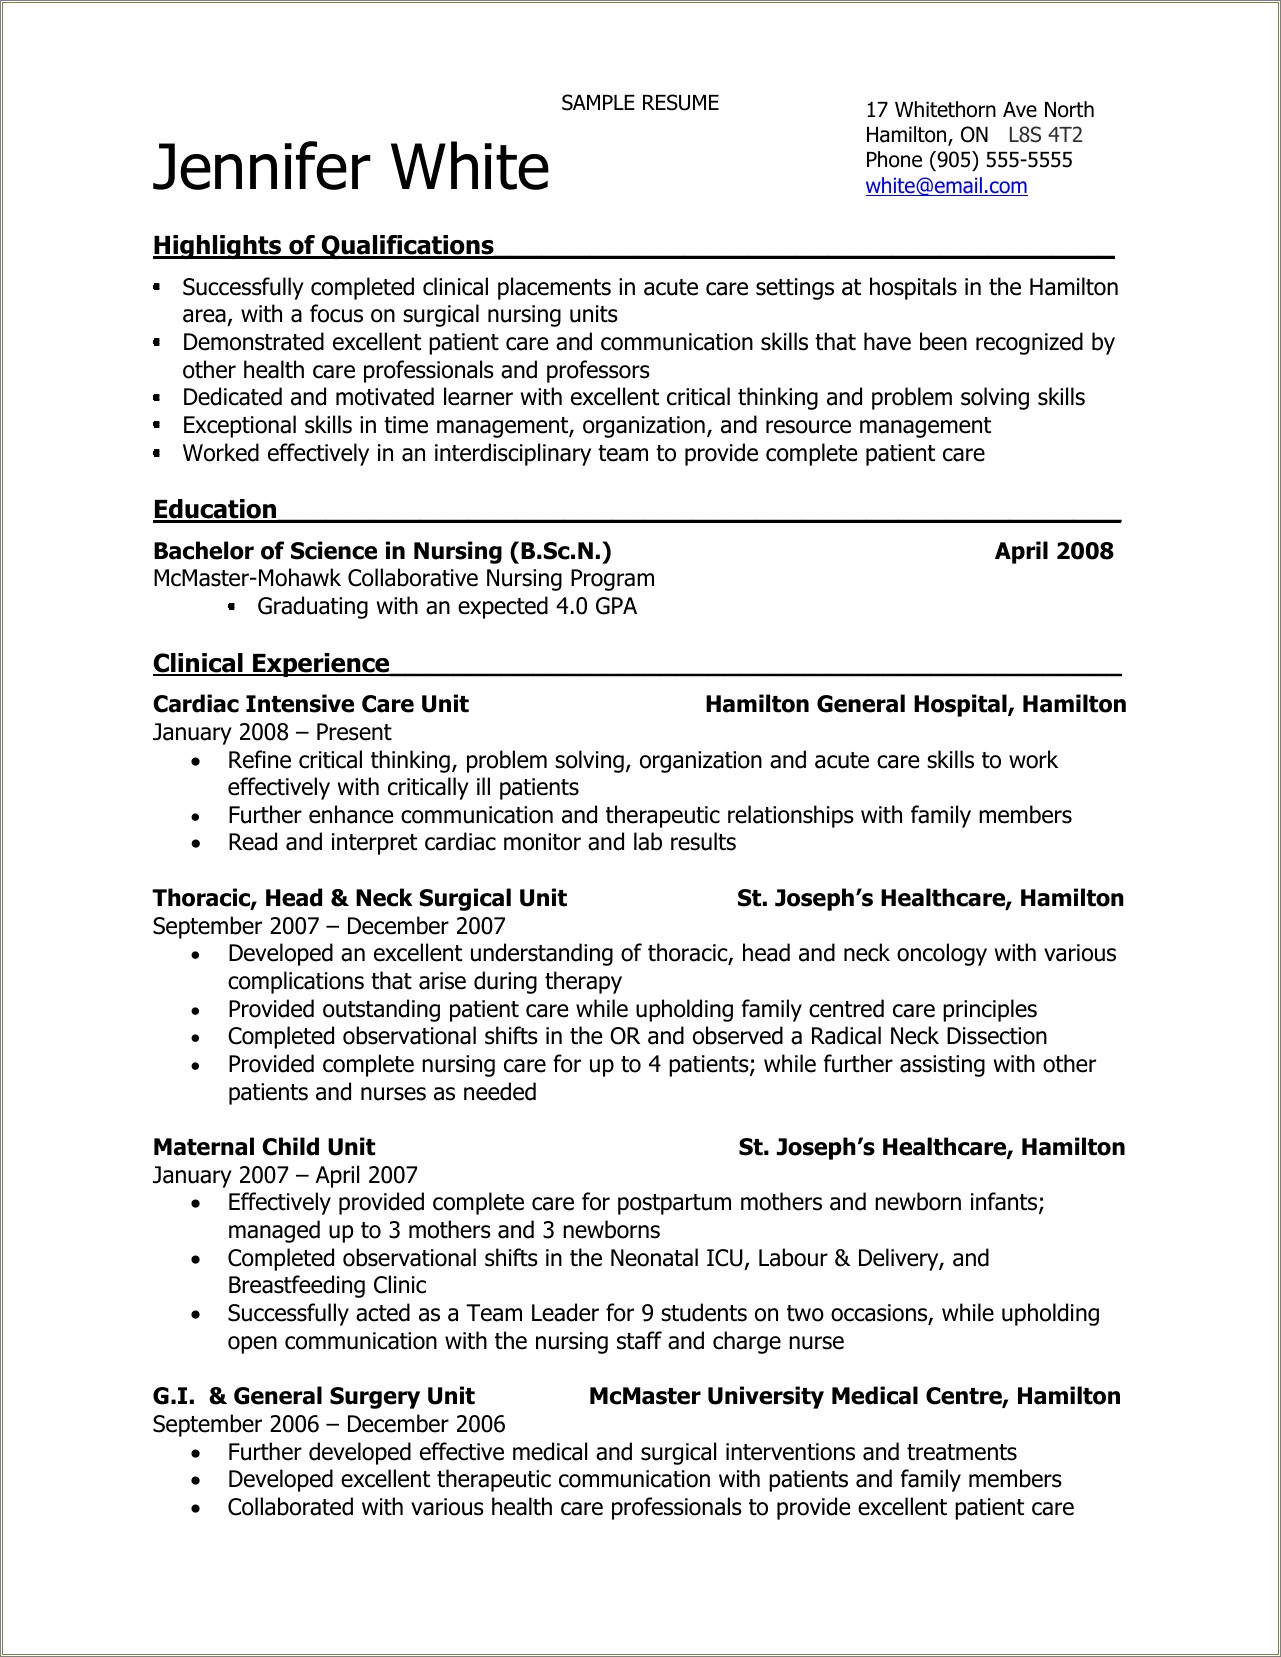 Nursing Student Resume Examples With Clinical Experience